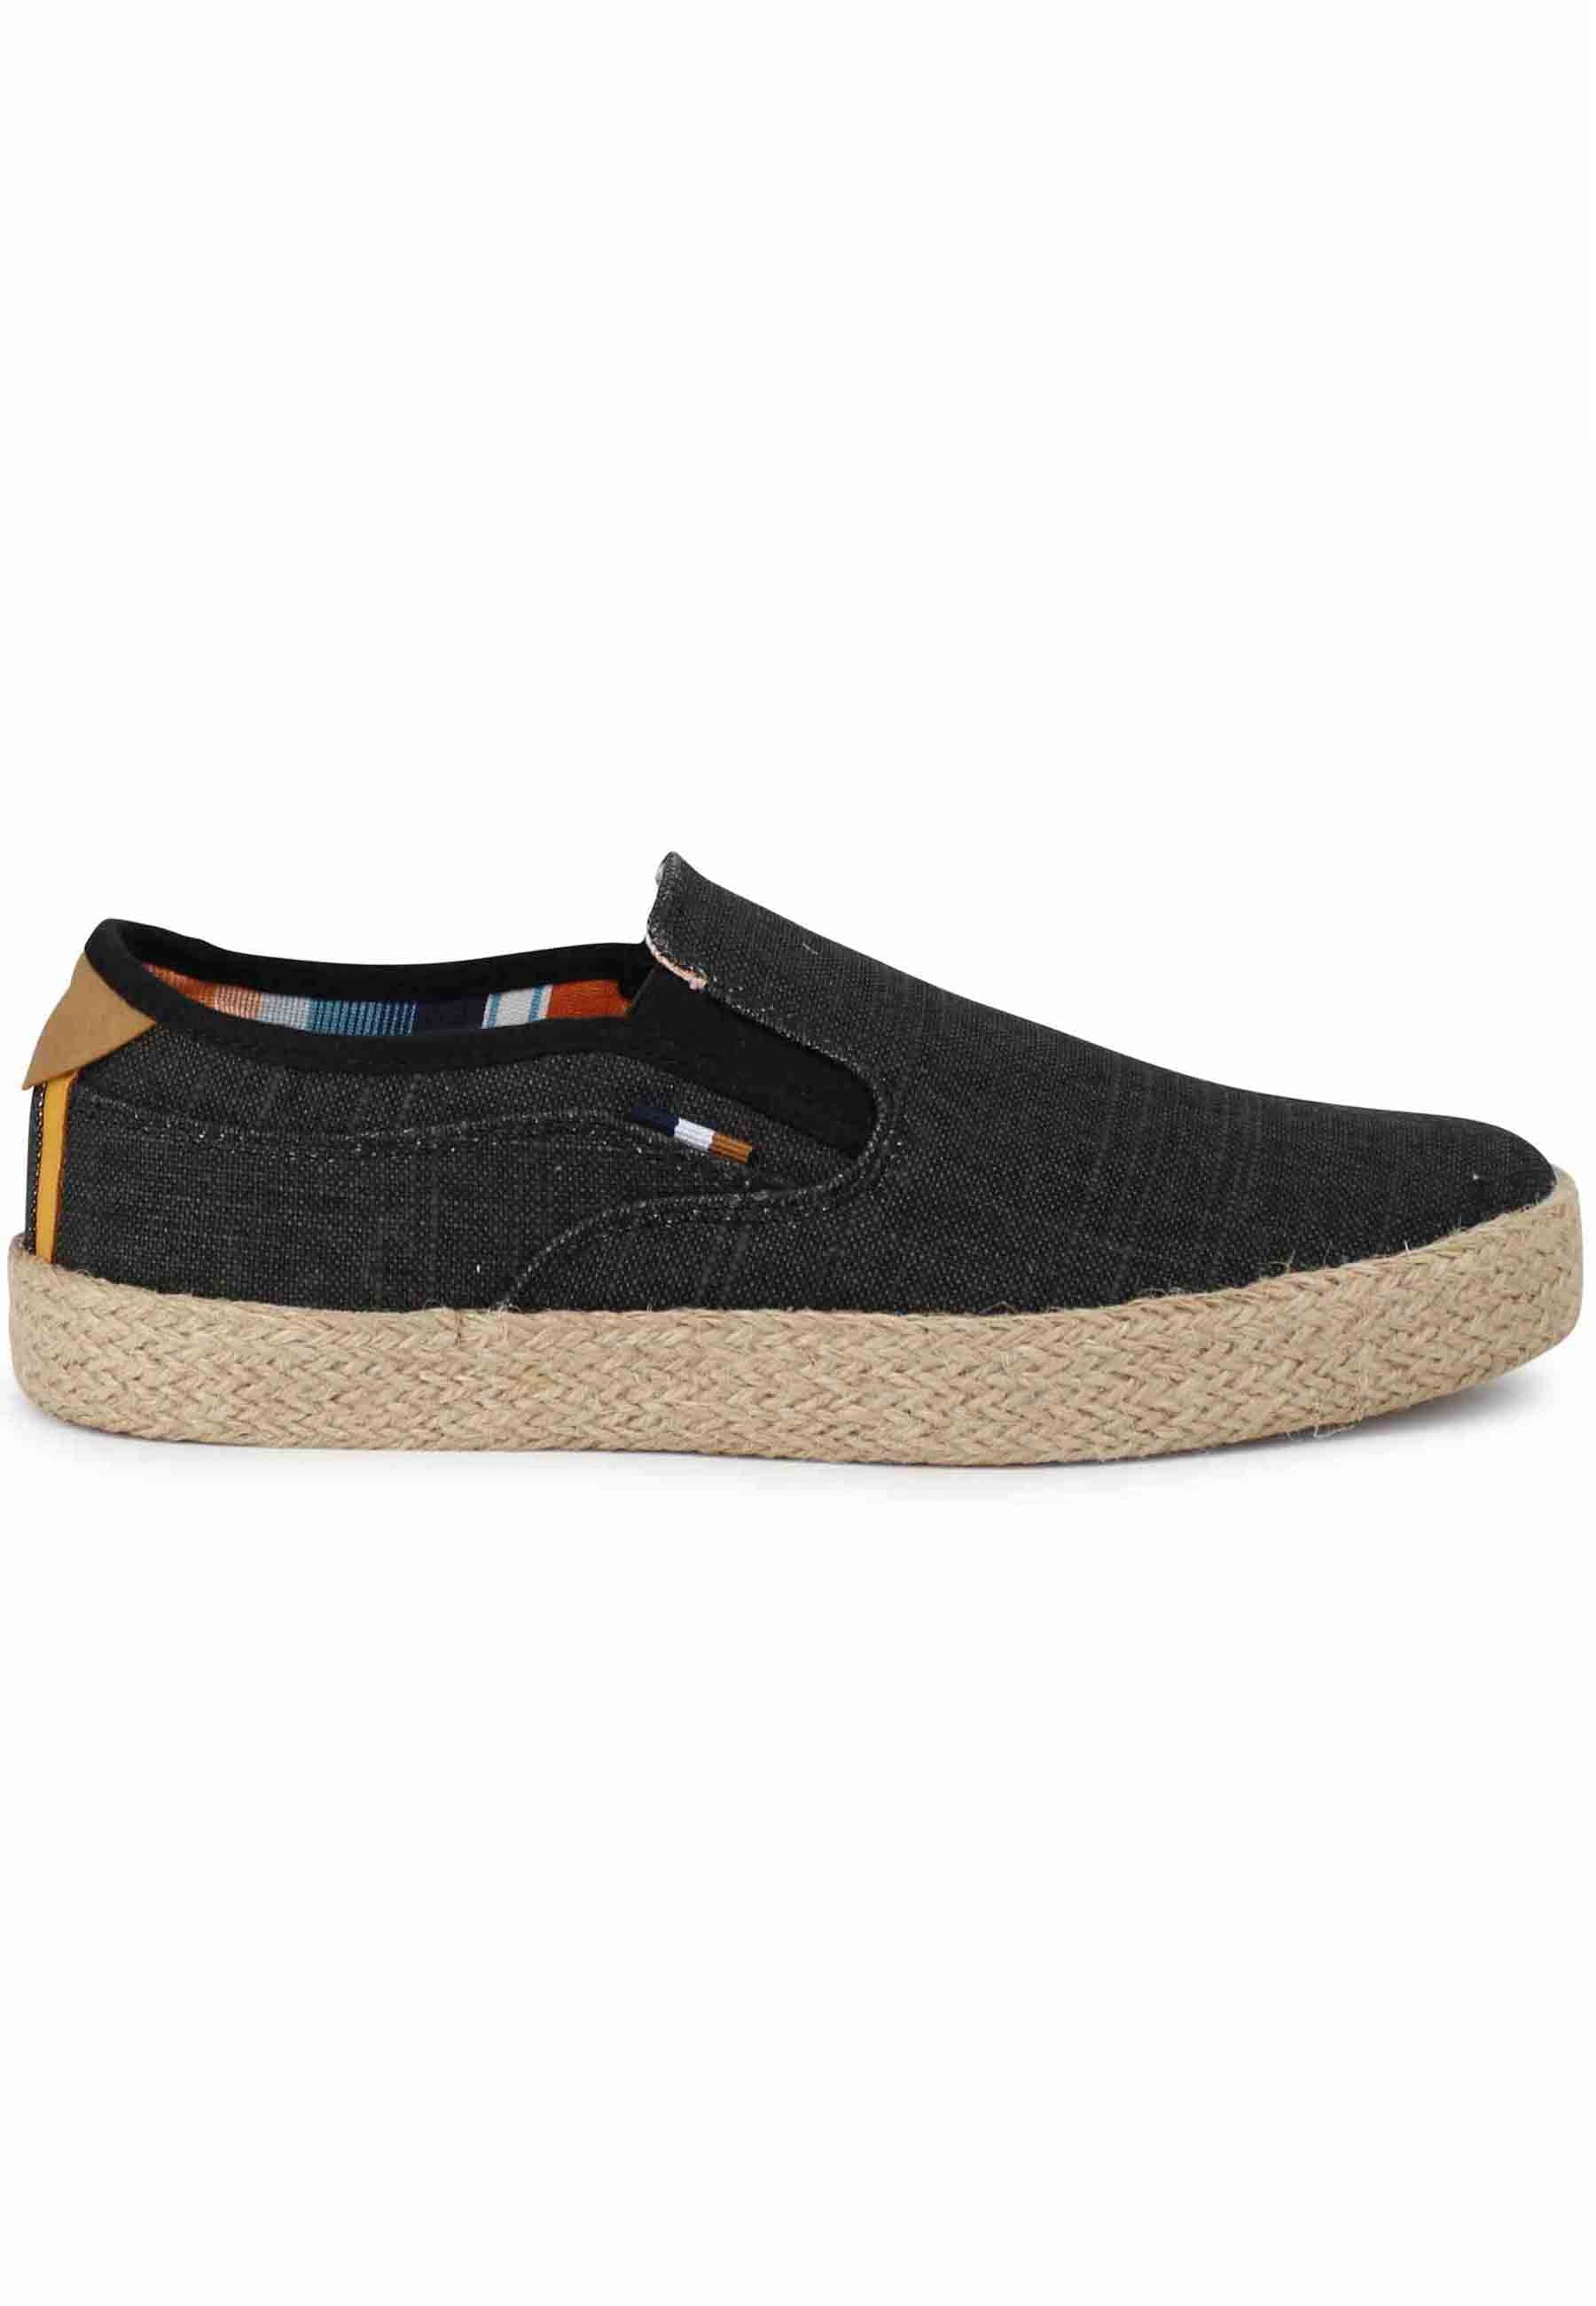 Calypso Slip On Rope men's moccasins in black fabric with rope sole